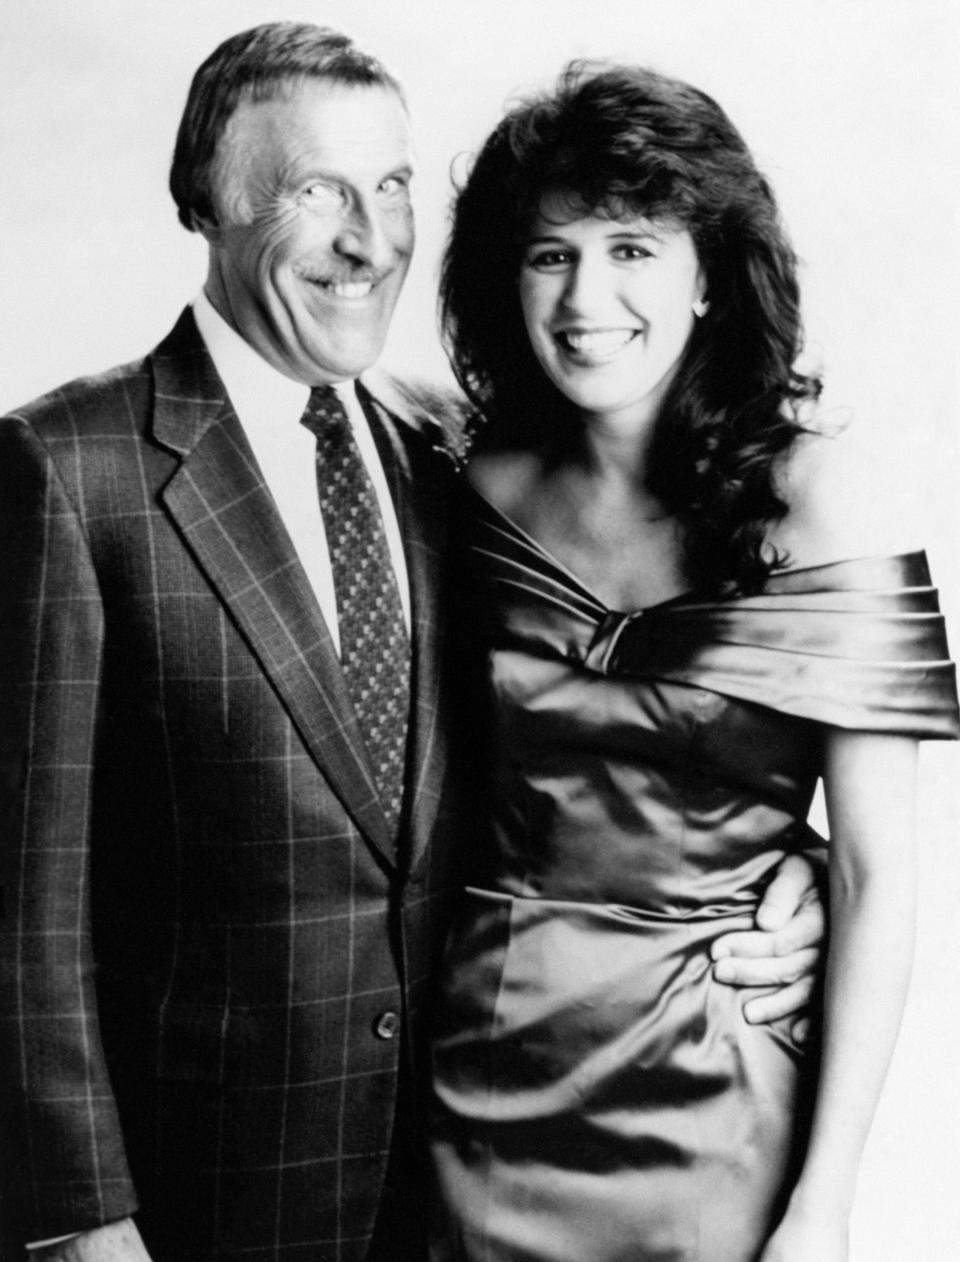 <p>Bruce Forsyth and Rosemary Ford at a photo call ahead of a new series of The Generation Game in 1990. </p>